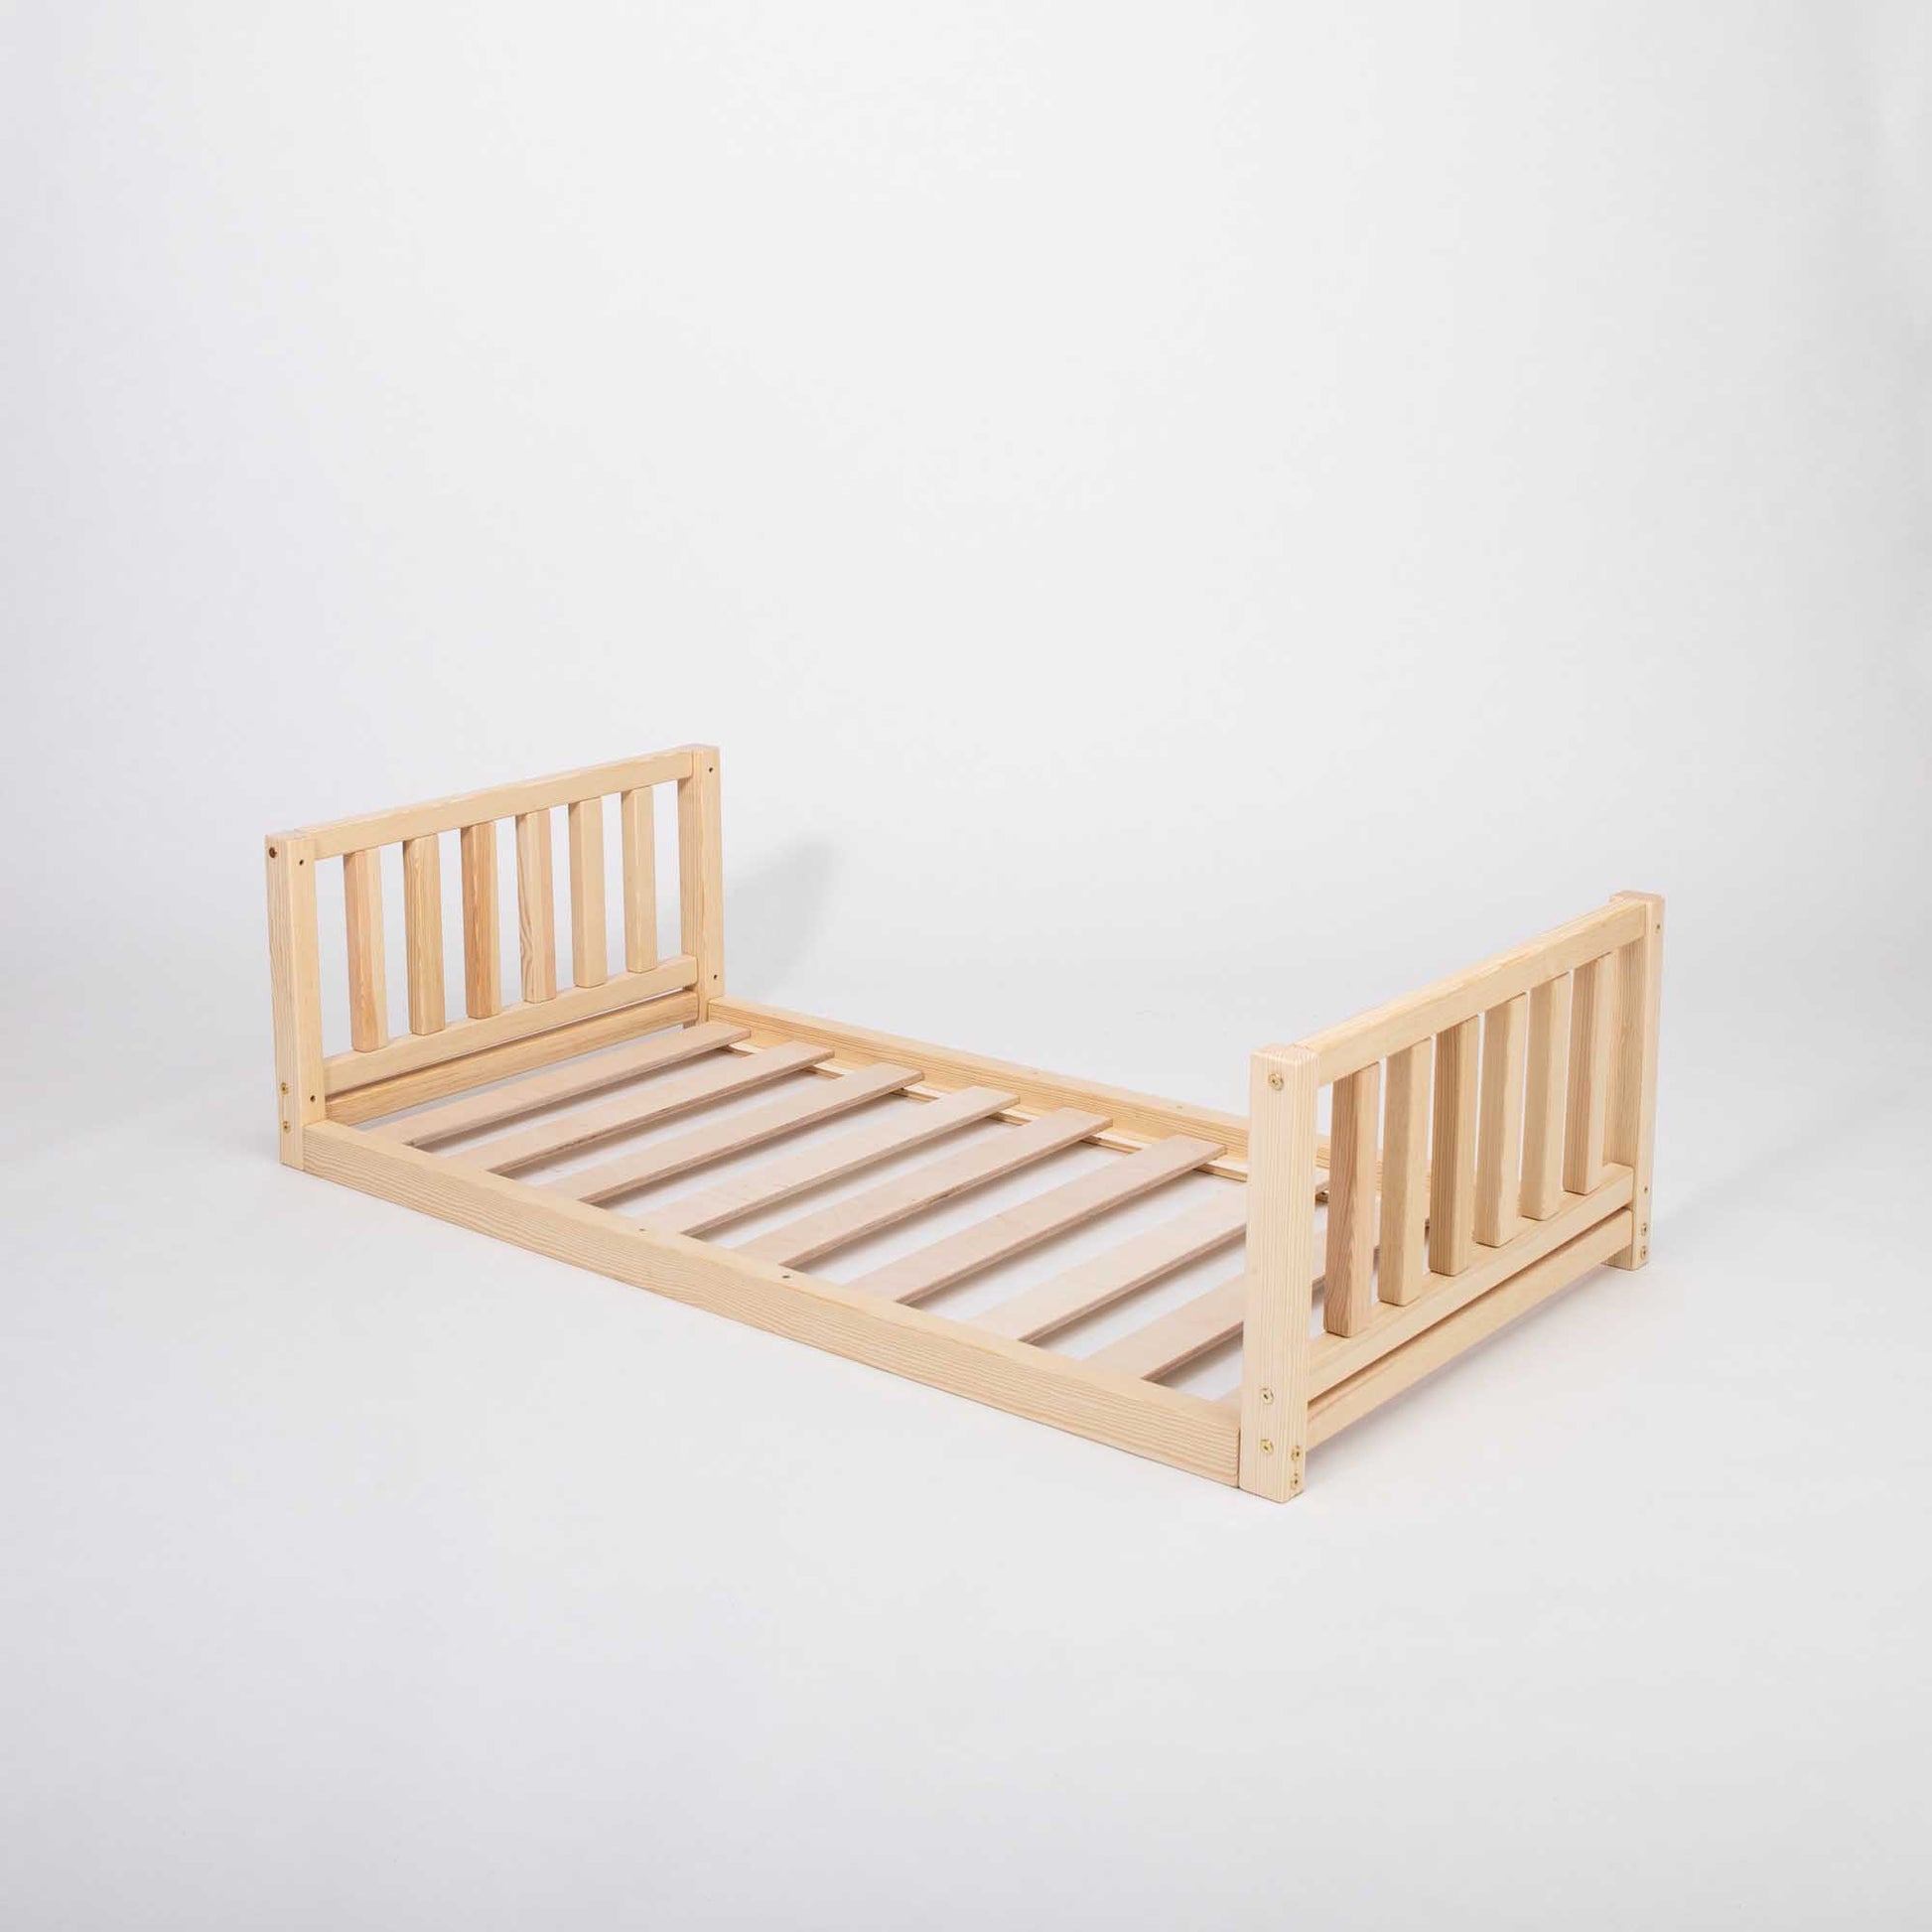 This 2-in-1 kid's bed on legs with a vertical rail headboard and footboard is made of solid pine or birch wood with slats, placed on a white background.